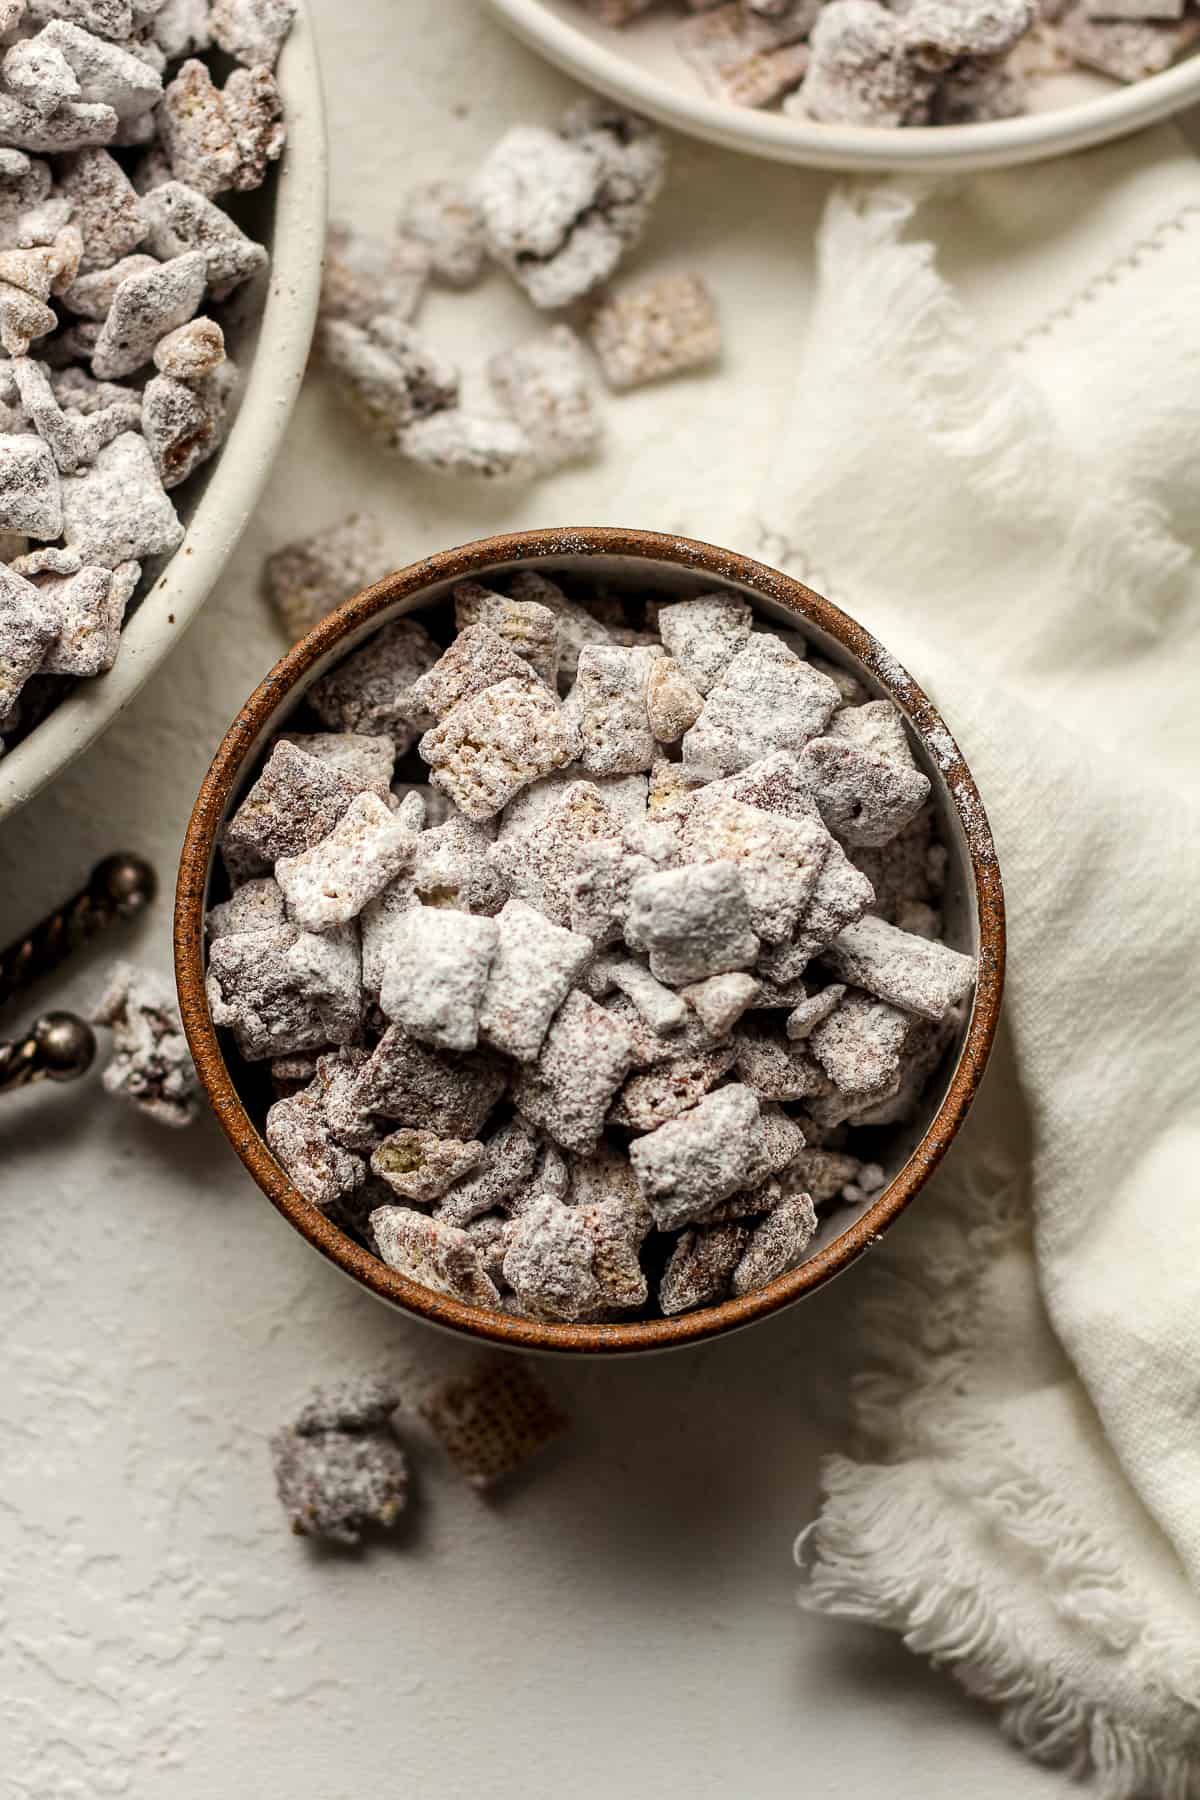 A small bowl of chocolate muddy buddies next to two other bowls and a white napkin.